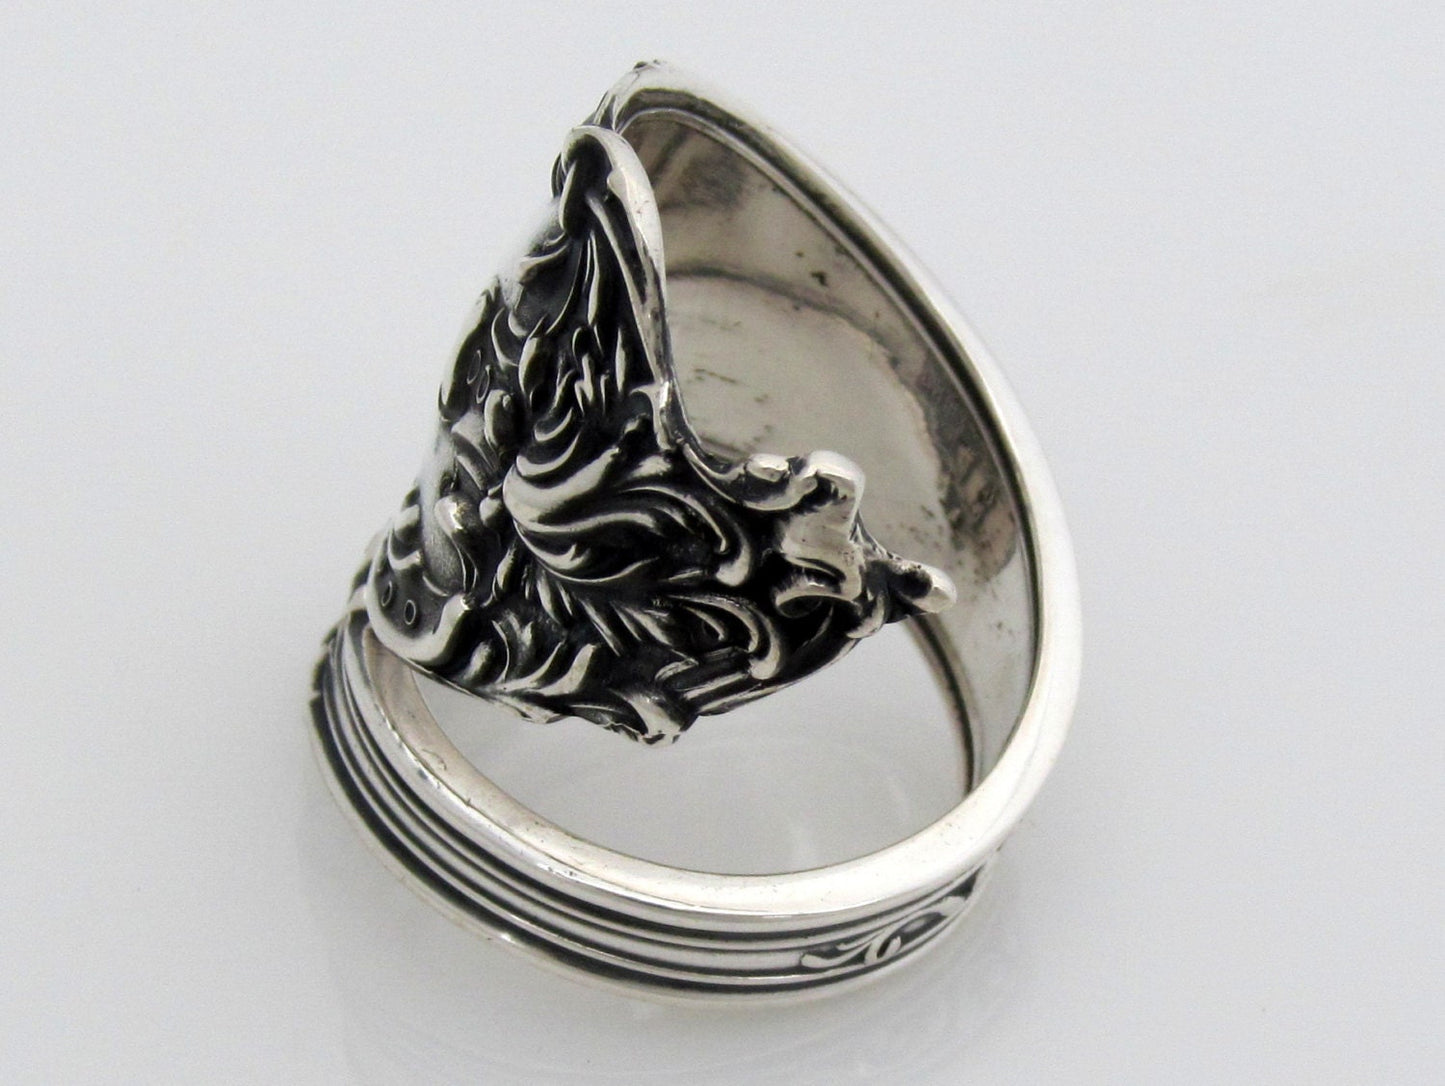 Altair Wrapped Sterling Silver Spoon Ring by Watson 1904 Art Nouveau